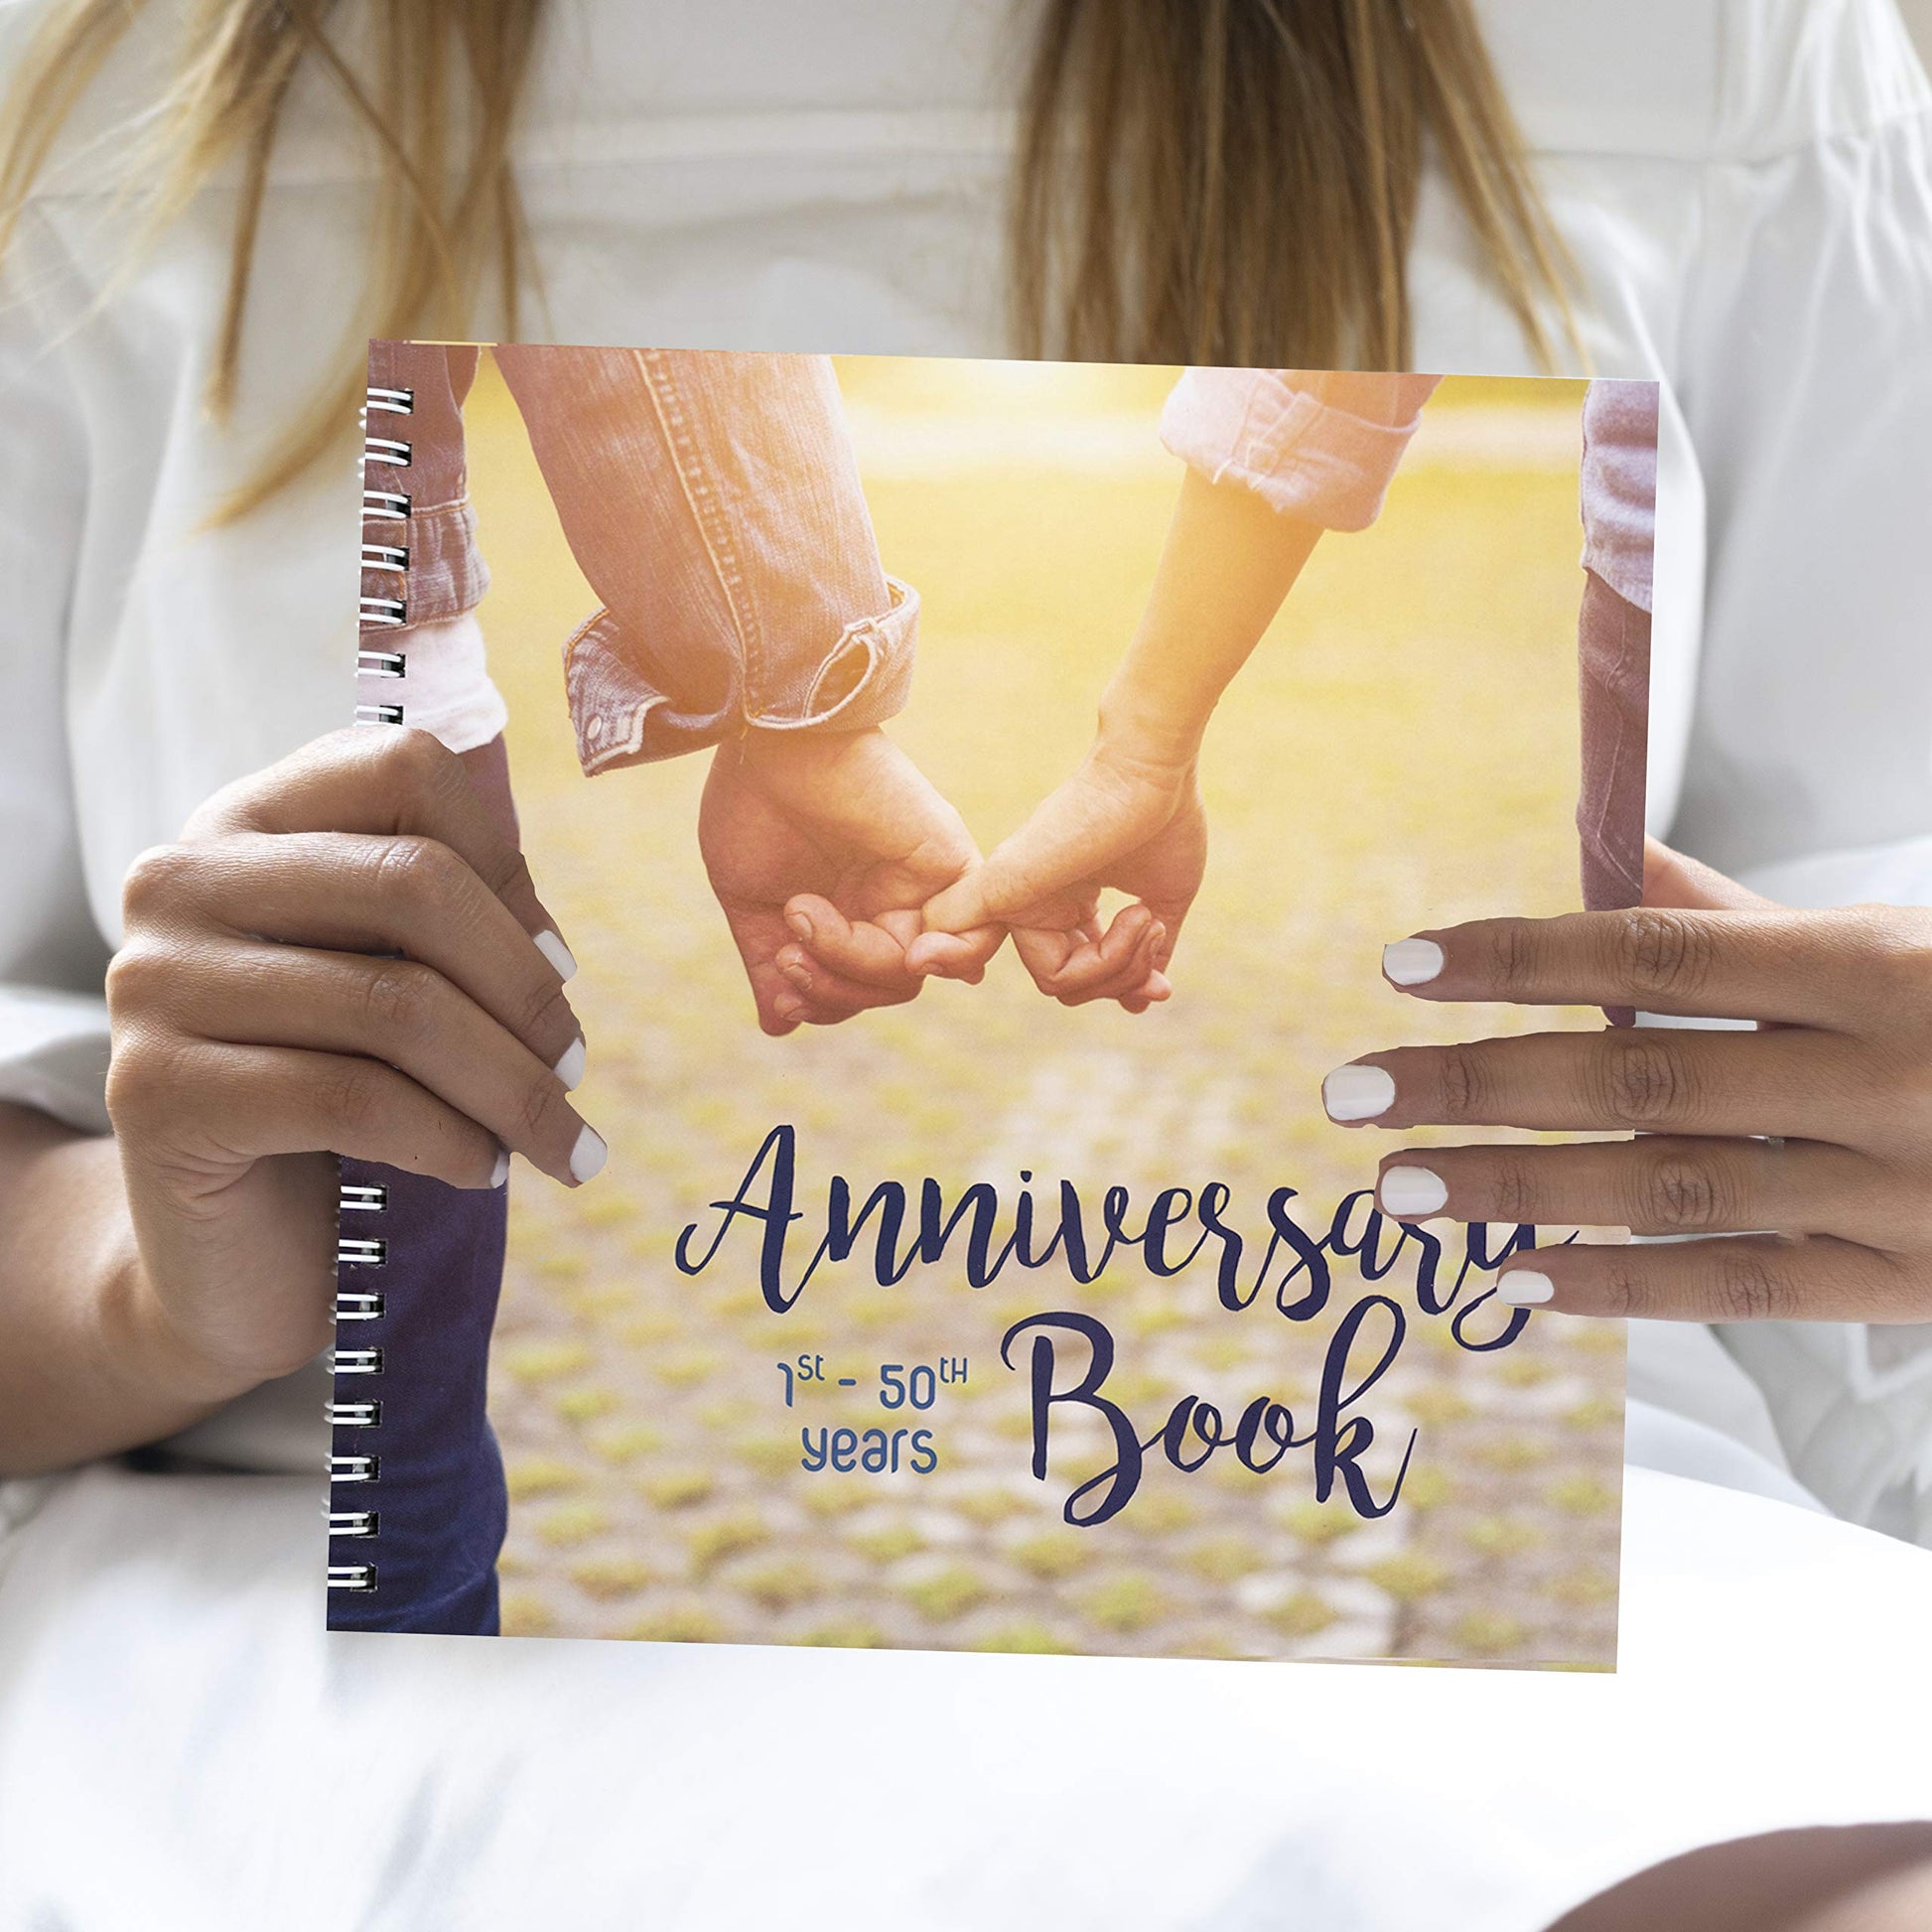 Wedding Anniversary Memory Book  A Hardcover Journal To Document